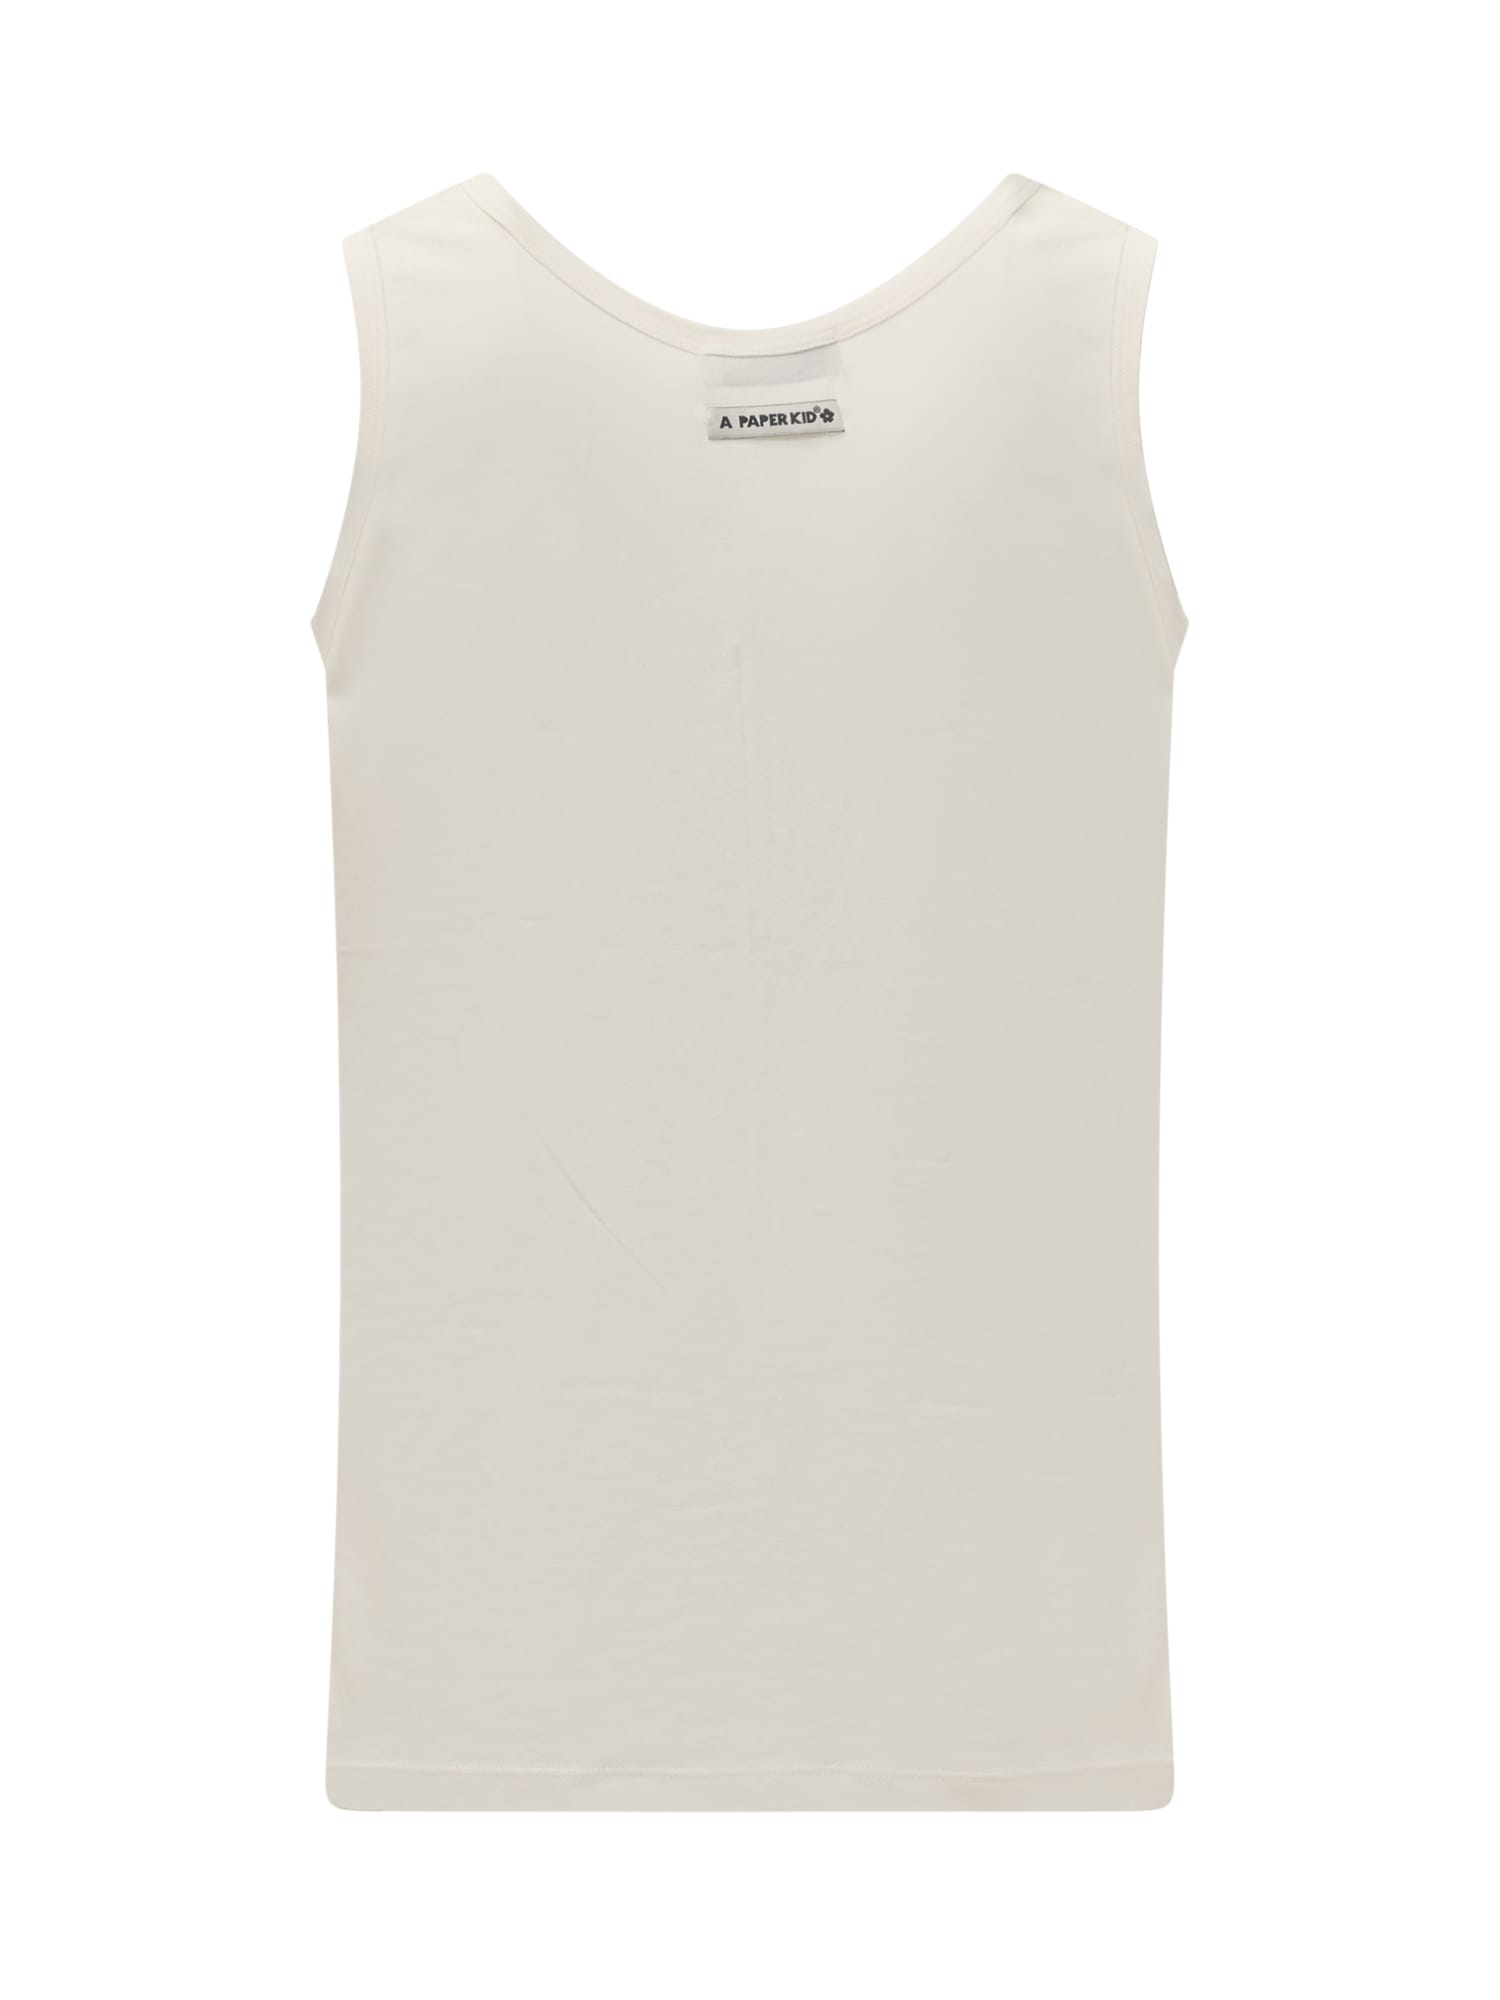 Shop A Paper Kid Tank Top With Flower Pin. In Beige